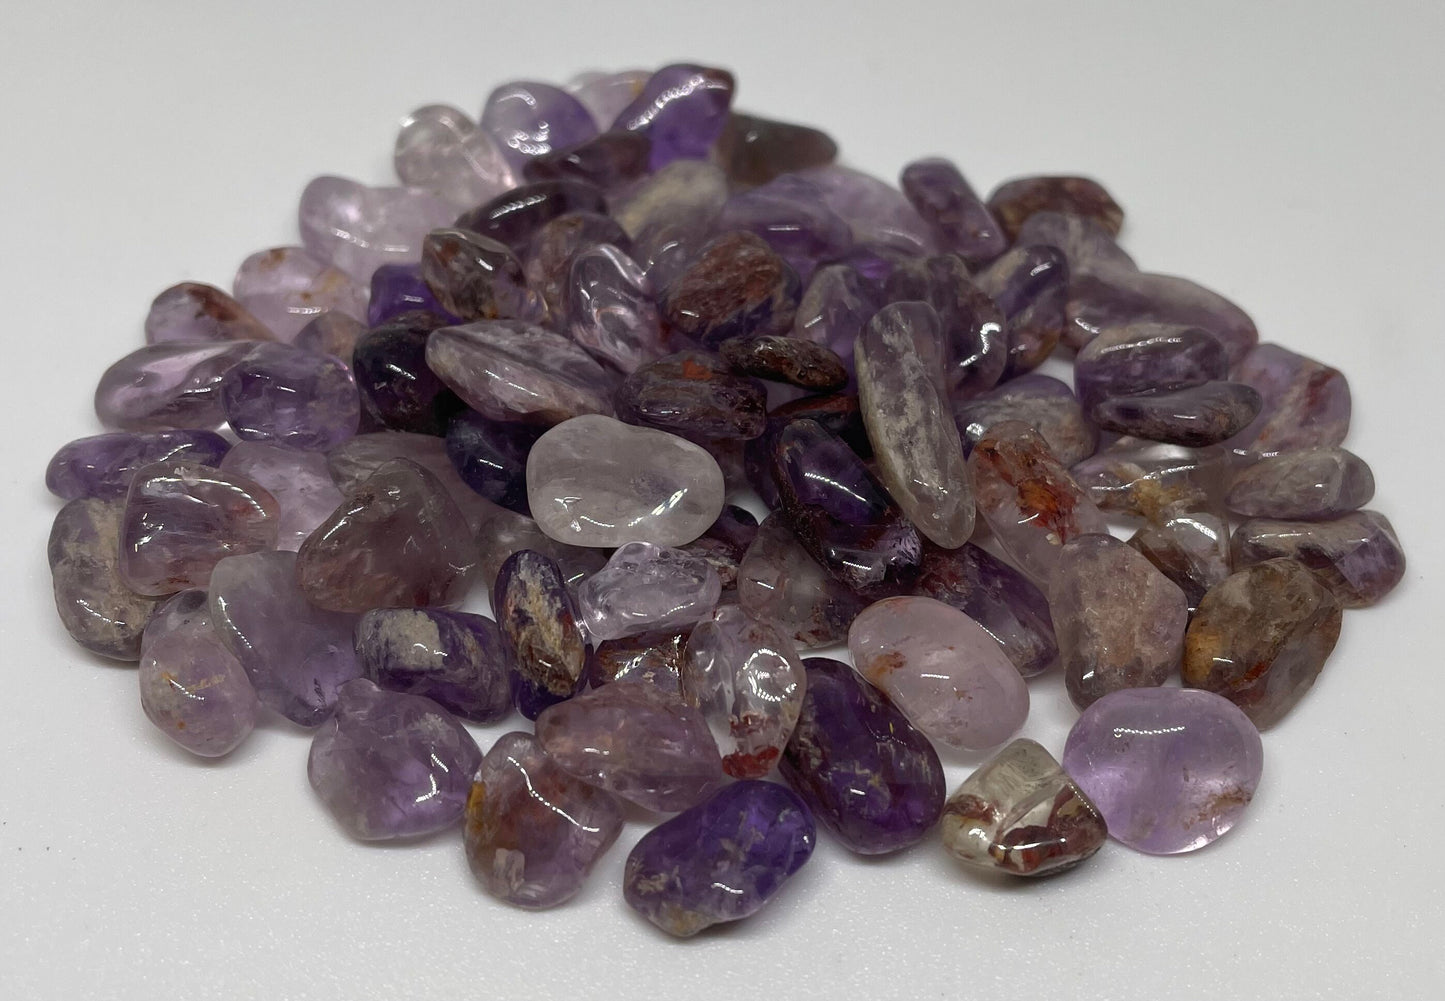 Super 7 | Melody Stone | Small Tumbled Stone | Premium Grade | Abilities and Flow of Energy | 1 Piece | Spiritual | Witch Tools & Supplies